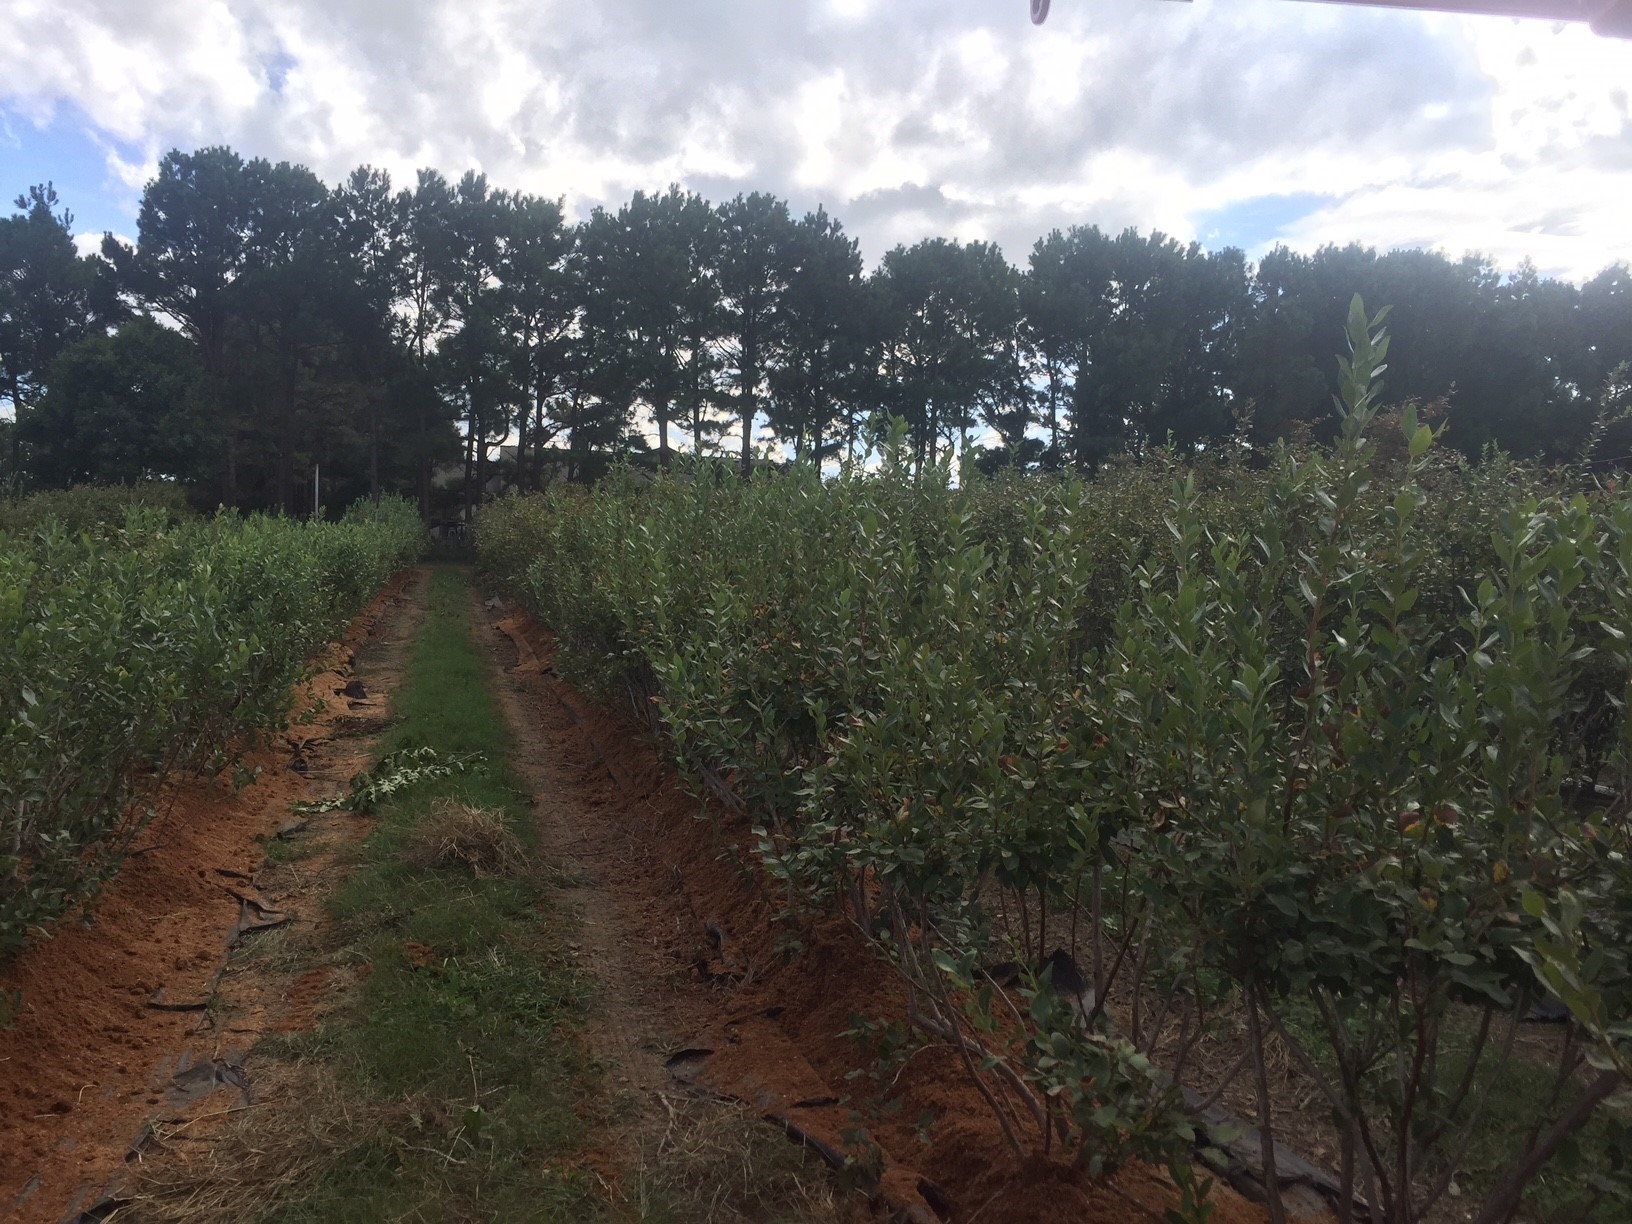 Two rows of blueberries with a path in the middle during the fall. Plants have green leaves and grey wood